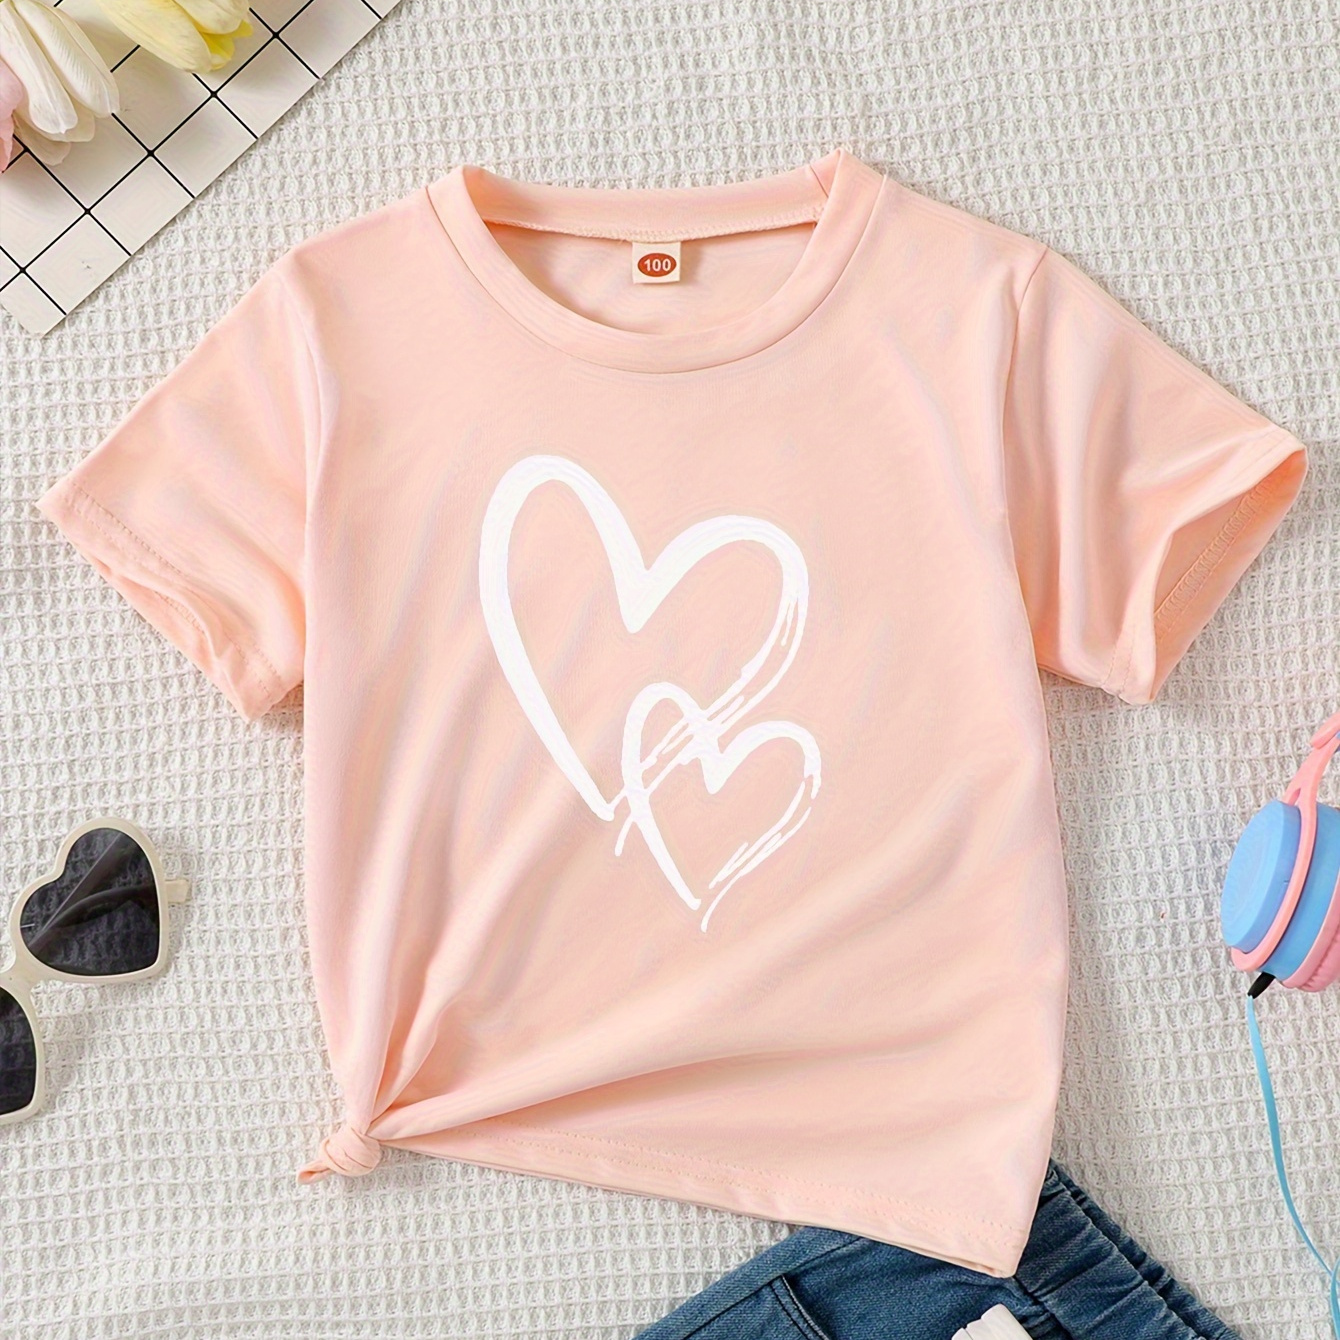 

Trendy Hearts Print Girls Creative T-shirt, Casual Lightweight Comfy Short Sleeve Crew Neck Tee Tops, Kids Clothings For Summer